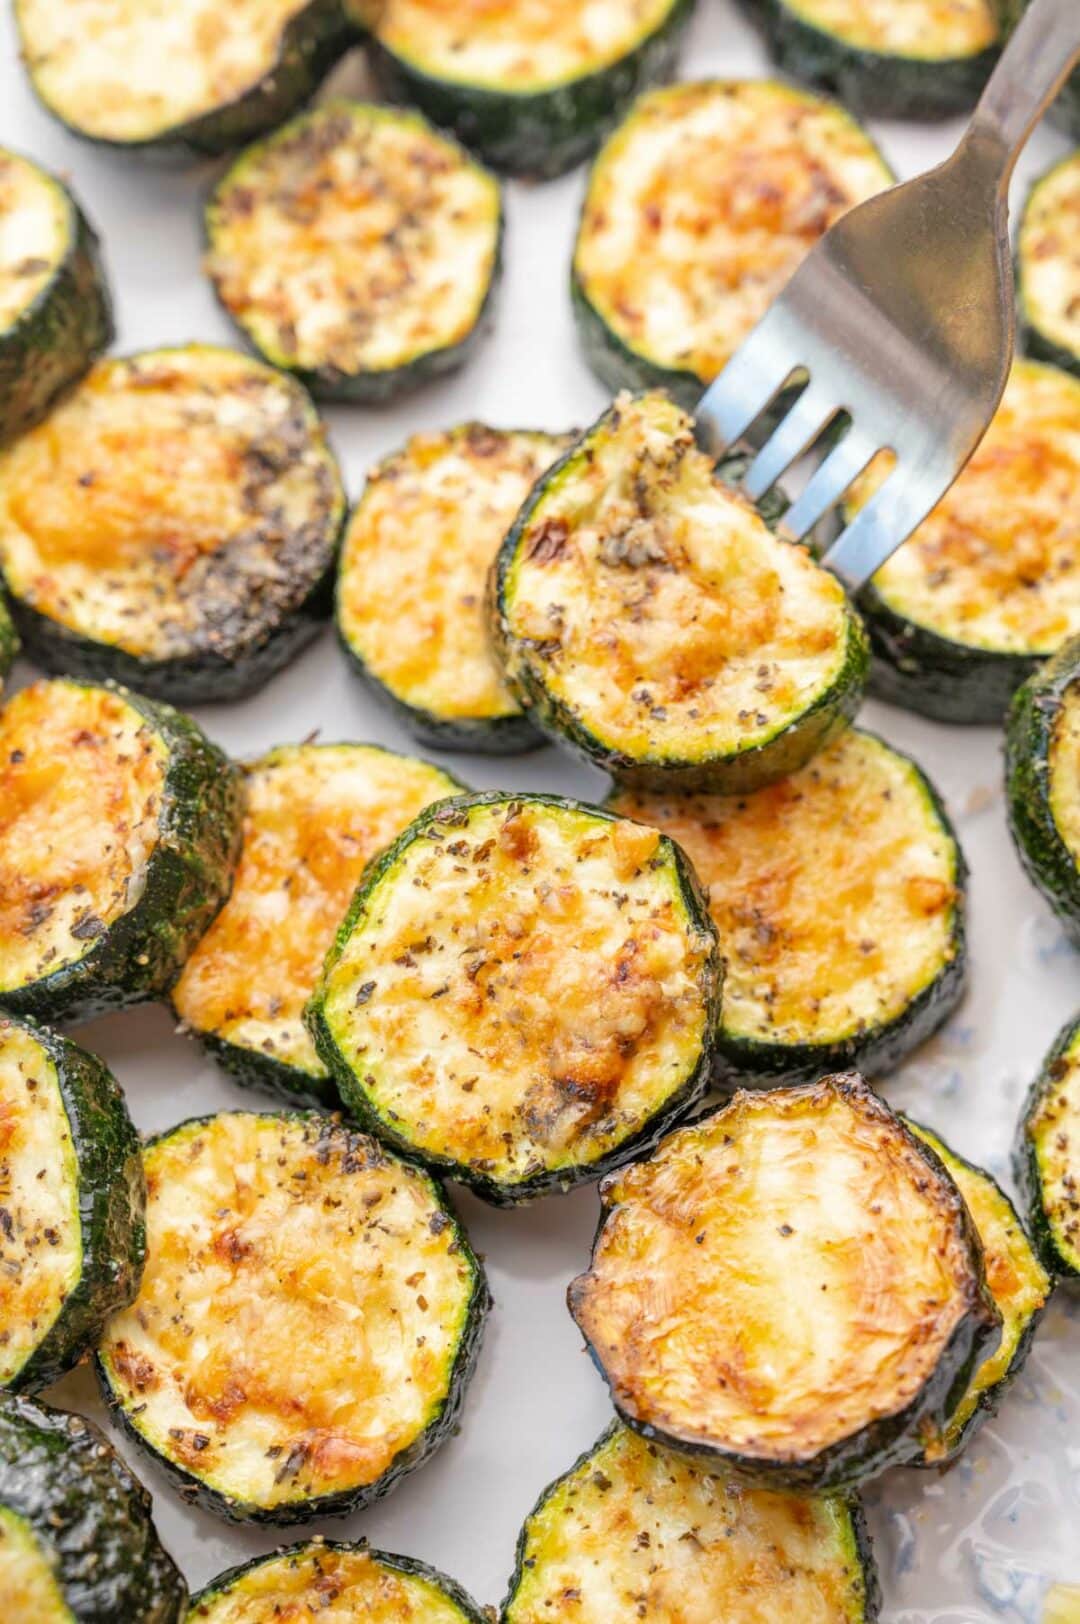 Baked Parmesan Zucchini - Everyday Delicious